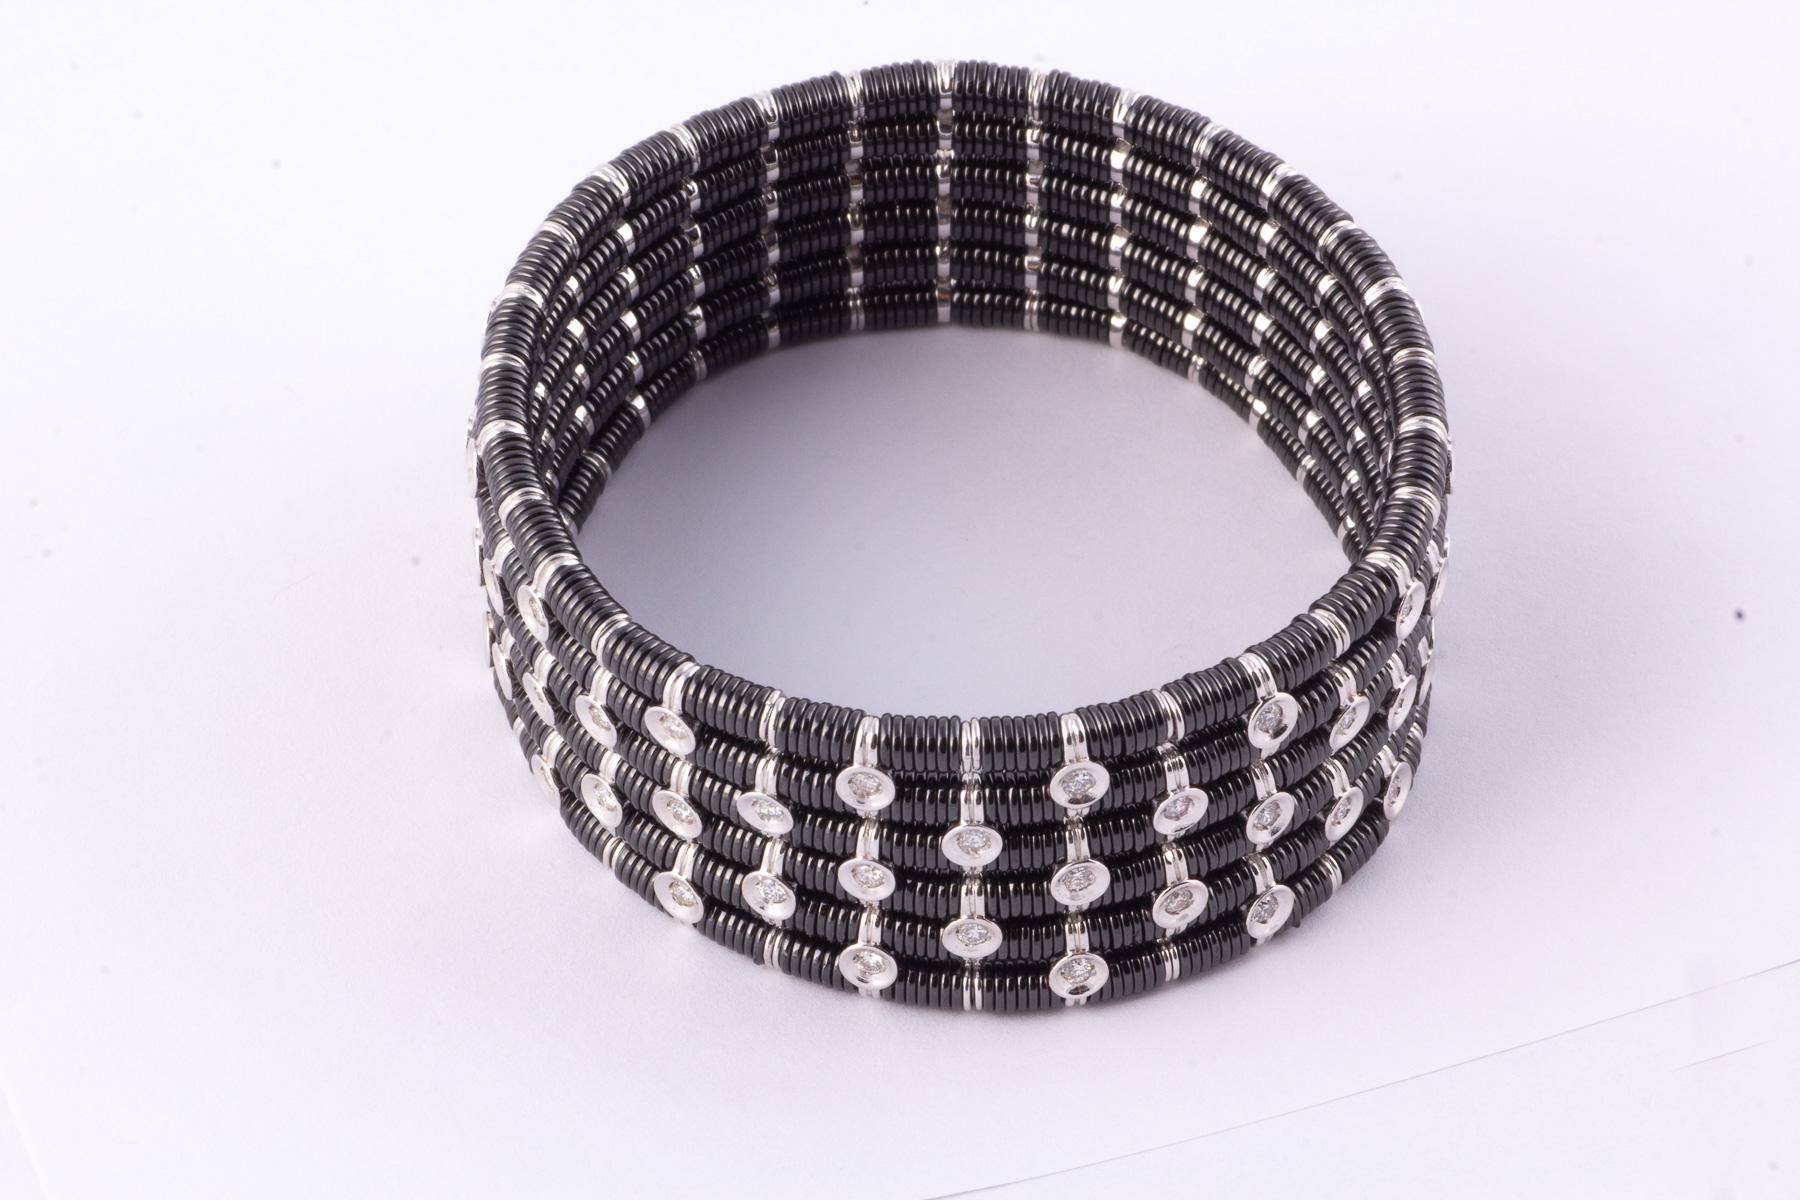 Striking Black Ceramic, 18 Karat White Gold and Diamond Stretch Bracelet In Excellent Condition For Sale In New Orleans, LA